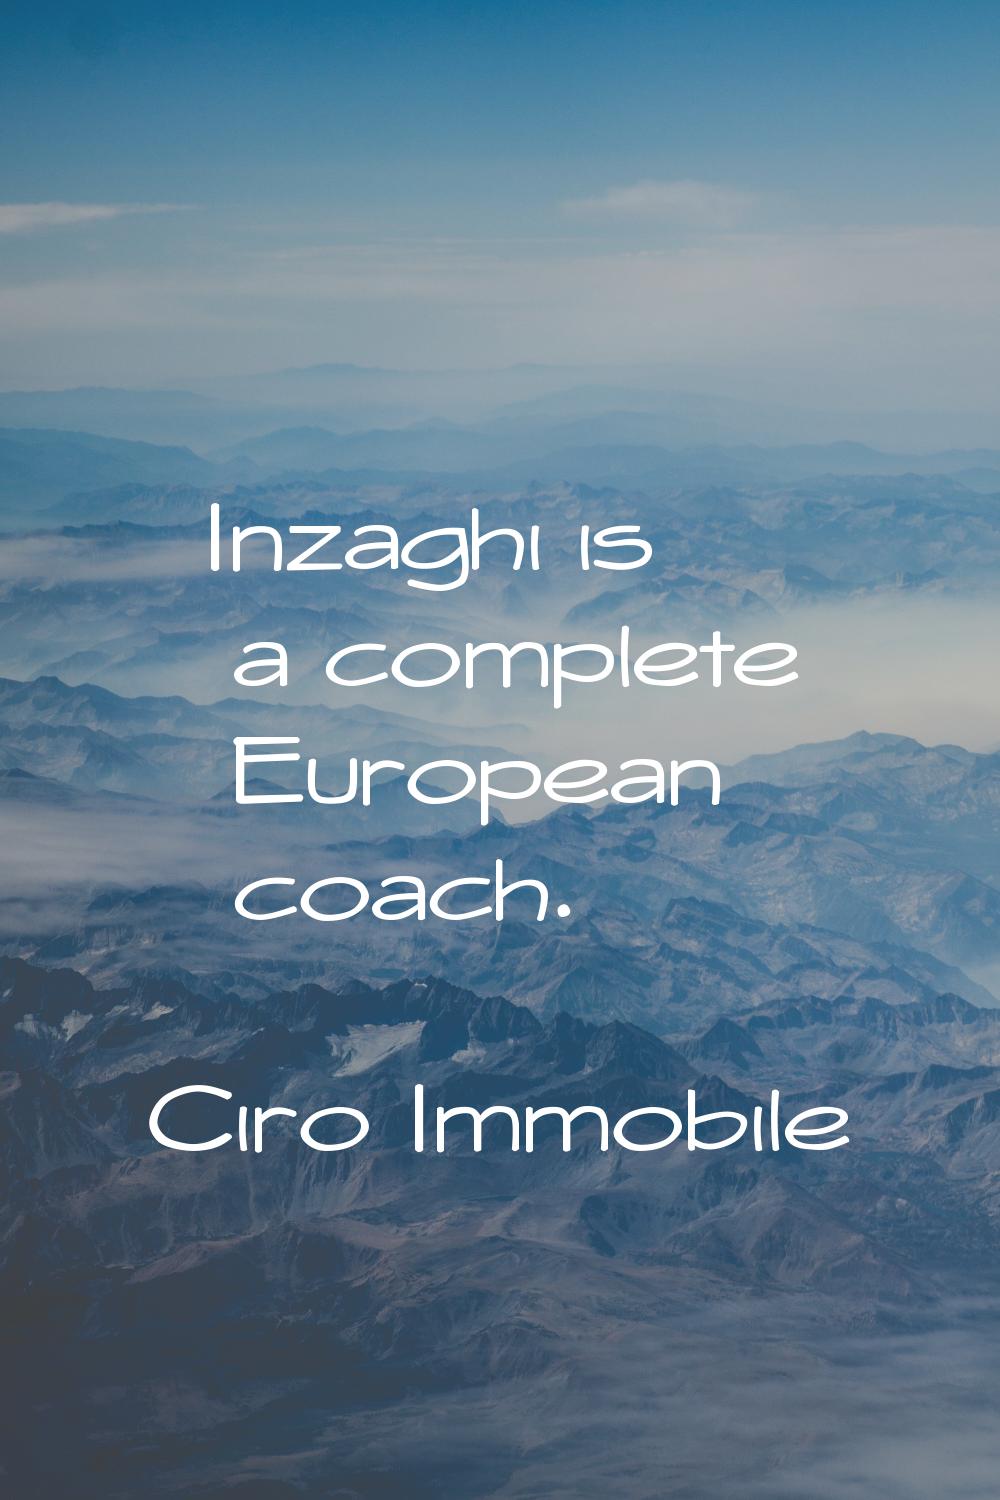 Inzaghi is a complete European coach.